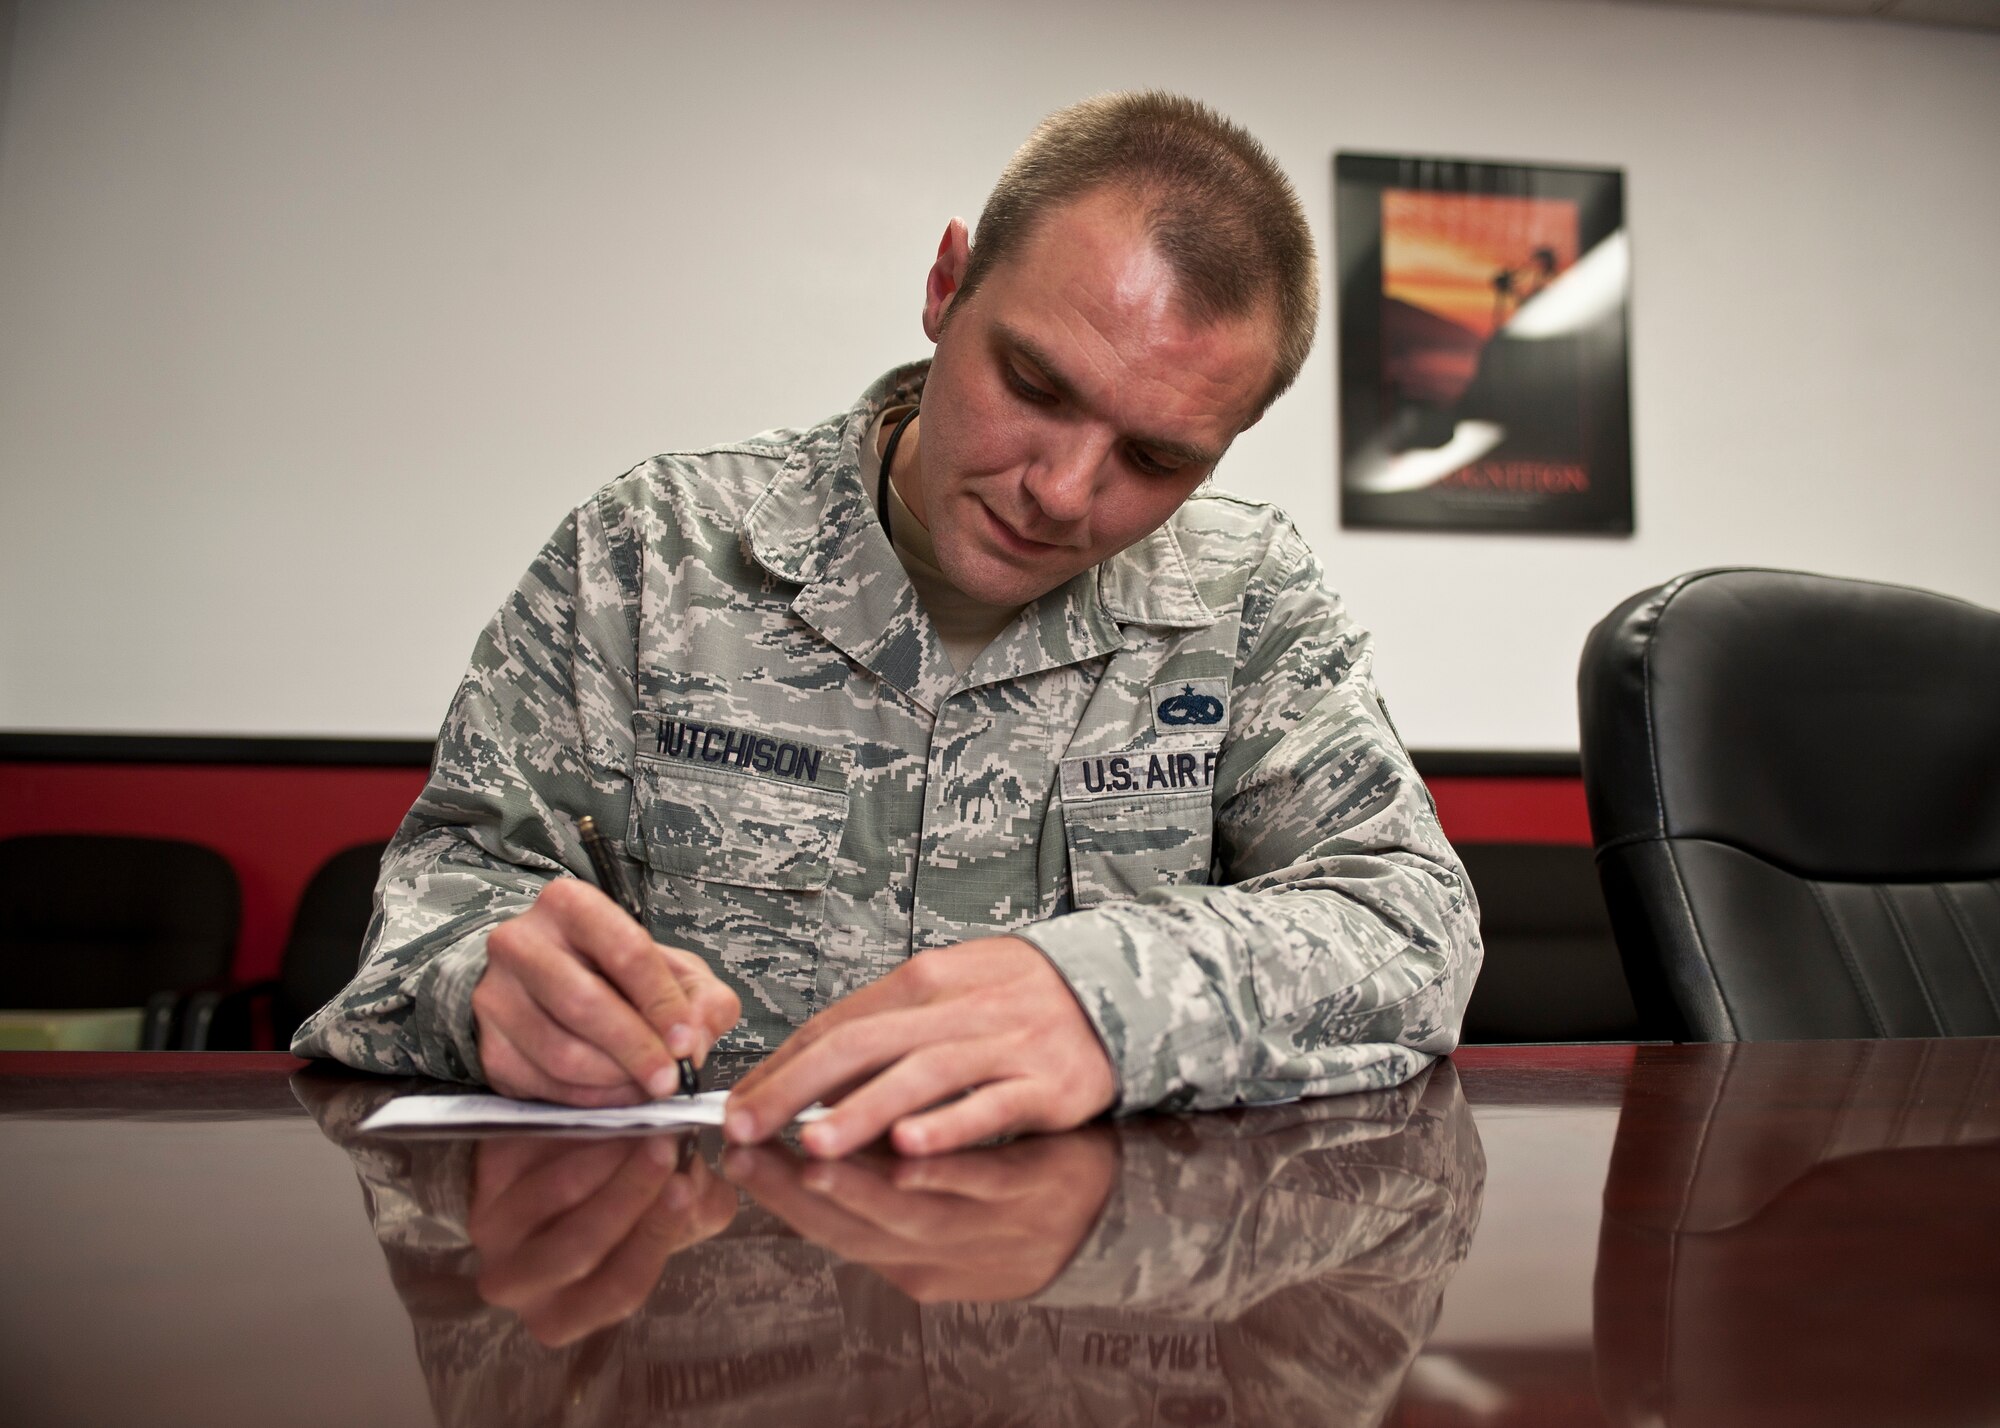 Master Sgt. Dennis Hutchison, 57th Aircraft Maintenance Squadron Tomahawks Aircraft Maintenance Unit production superintendent, fills out a pledge form for the 2015 Air Force Assistance Fund drive at Nellis Air Force Base, Nev., March 17, 2015. Hutchison’s father passed away in 2005 and he did not have enough money to travel to his hometown in Missouri from his assigned duty station in Georgia, but received an interest-free loan from the Air Force Aid Society to cover his travel costs. Now an avid supporter of the AFAF, which supports and funds four different charities including the AFAS, Hutchison encourages Airmen of all ranks and ages to donate to the AFAF drive. (U.S. Air Force photo by Staff Sgt. Siuta B. Ika)